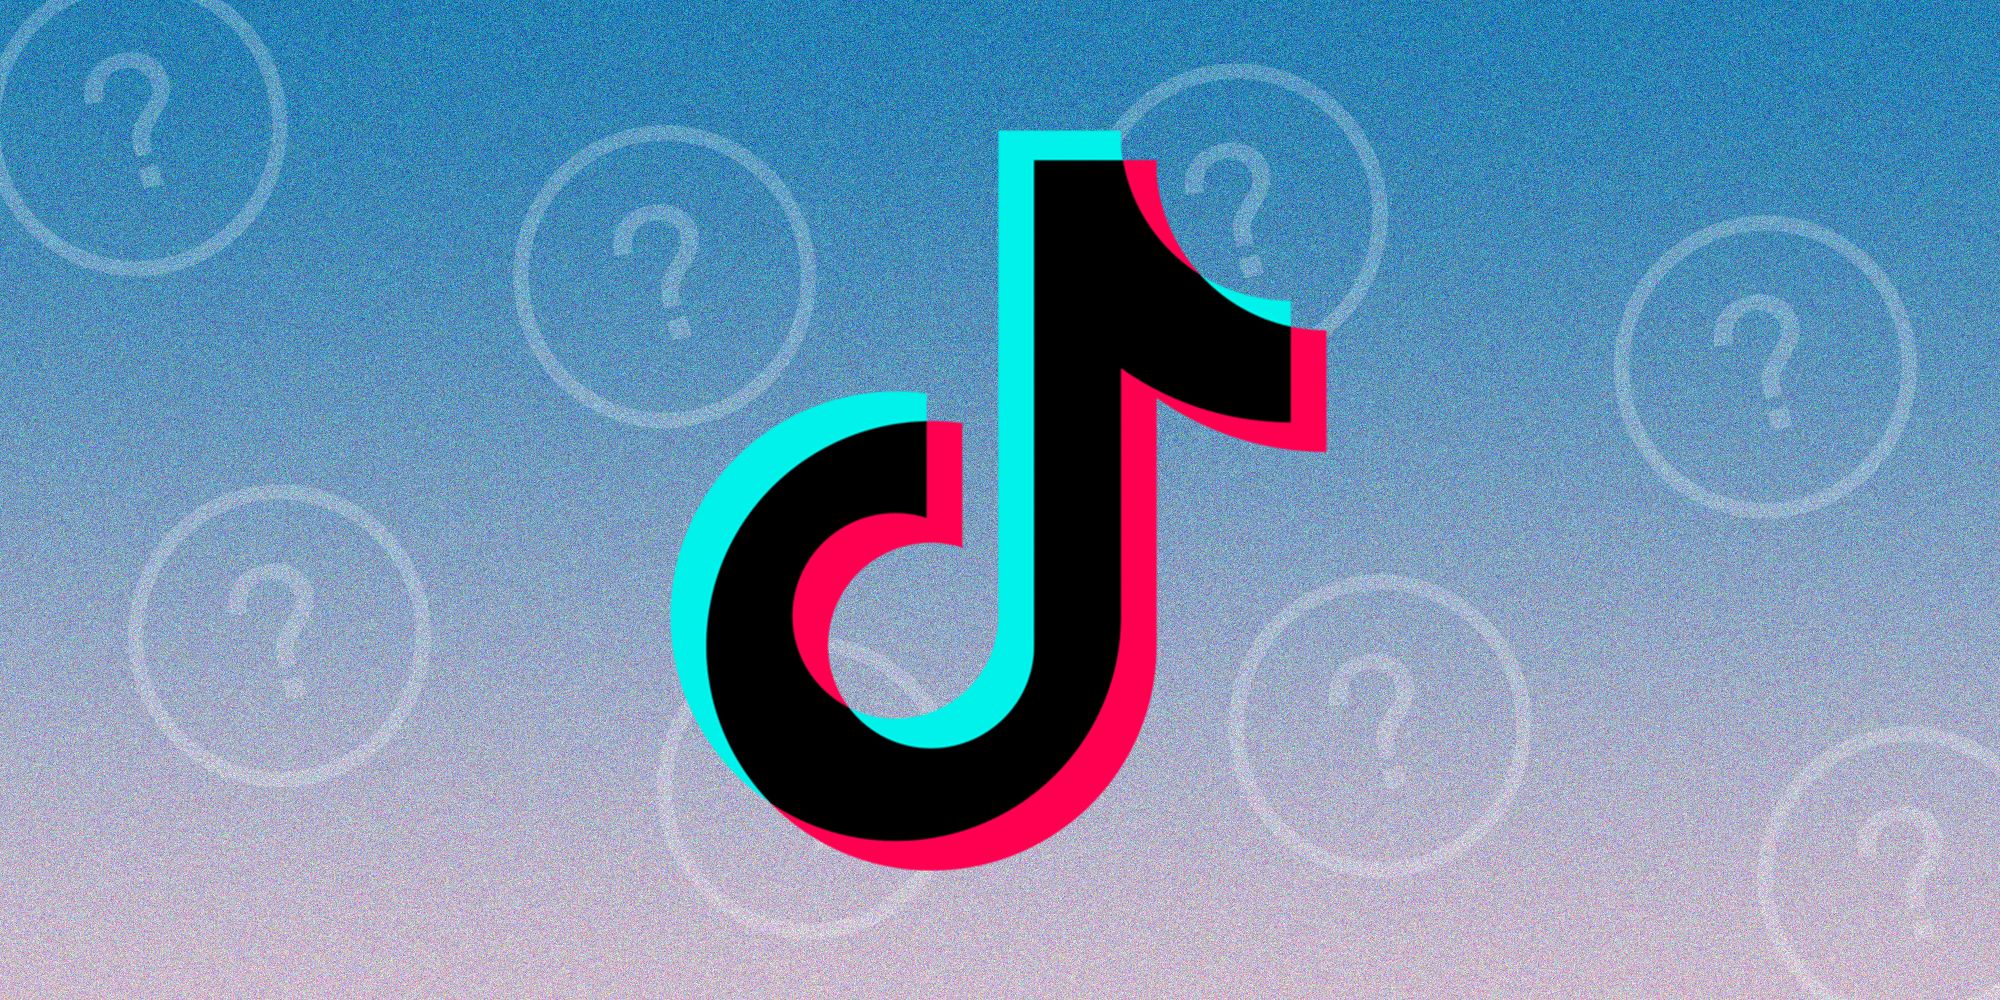 TikTok Why This Video Icon on a grainy blue and pink background